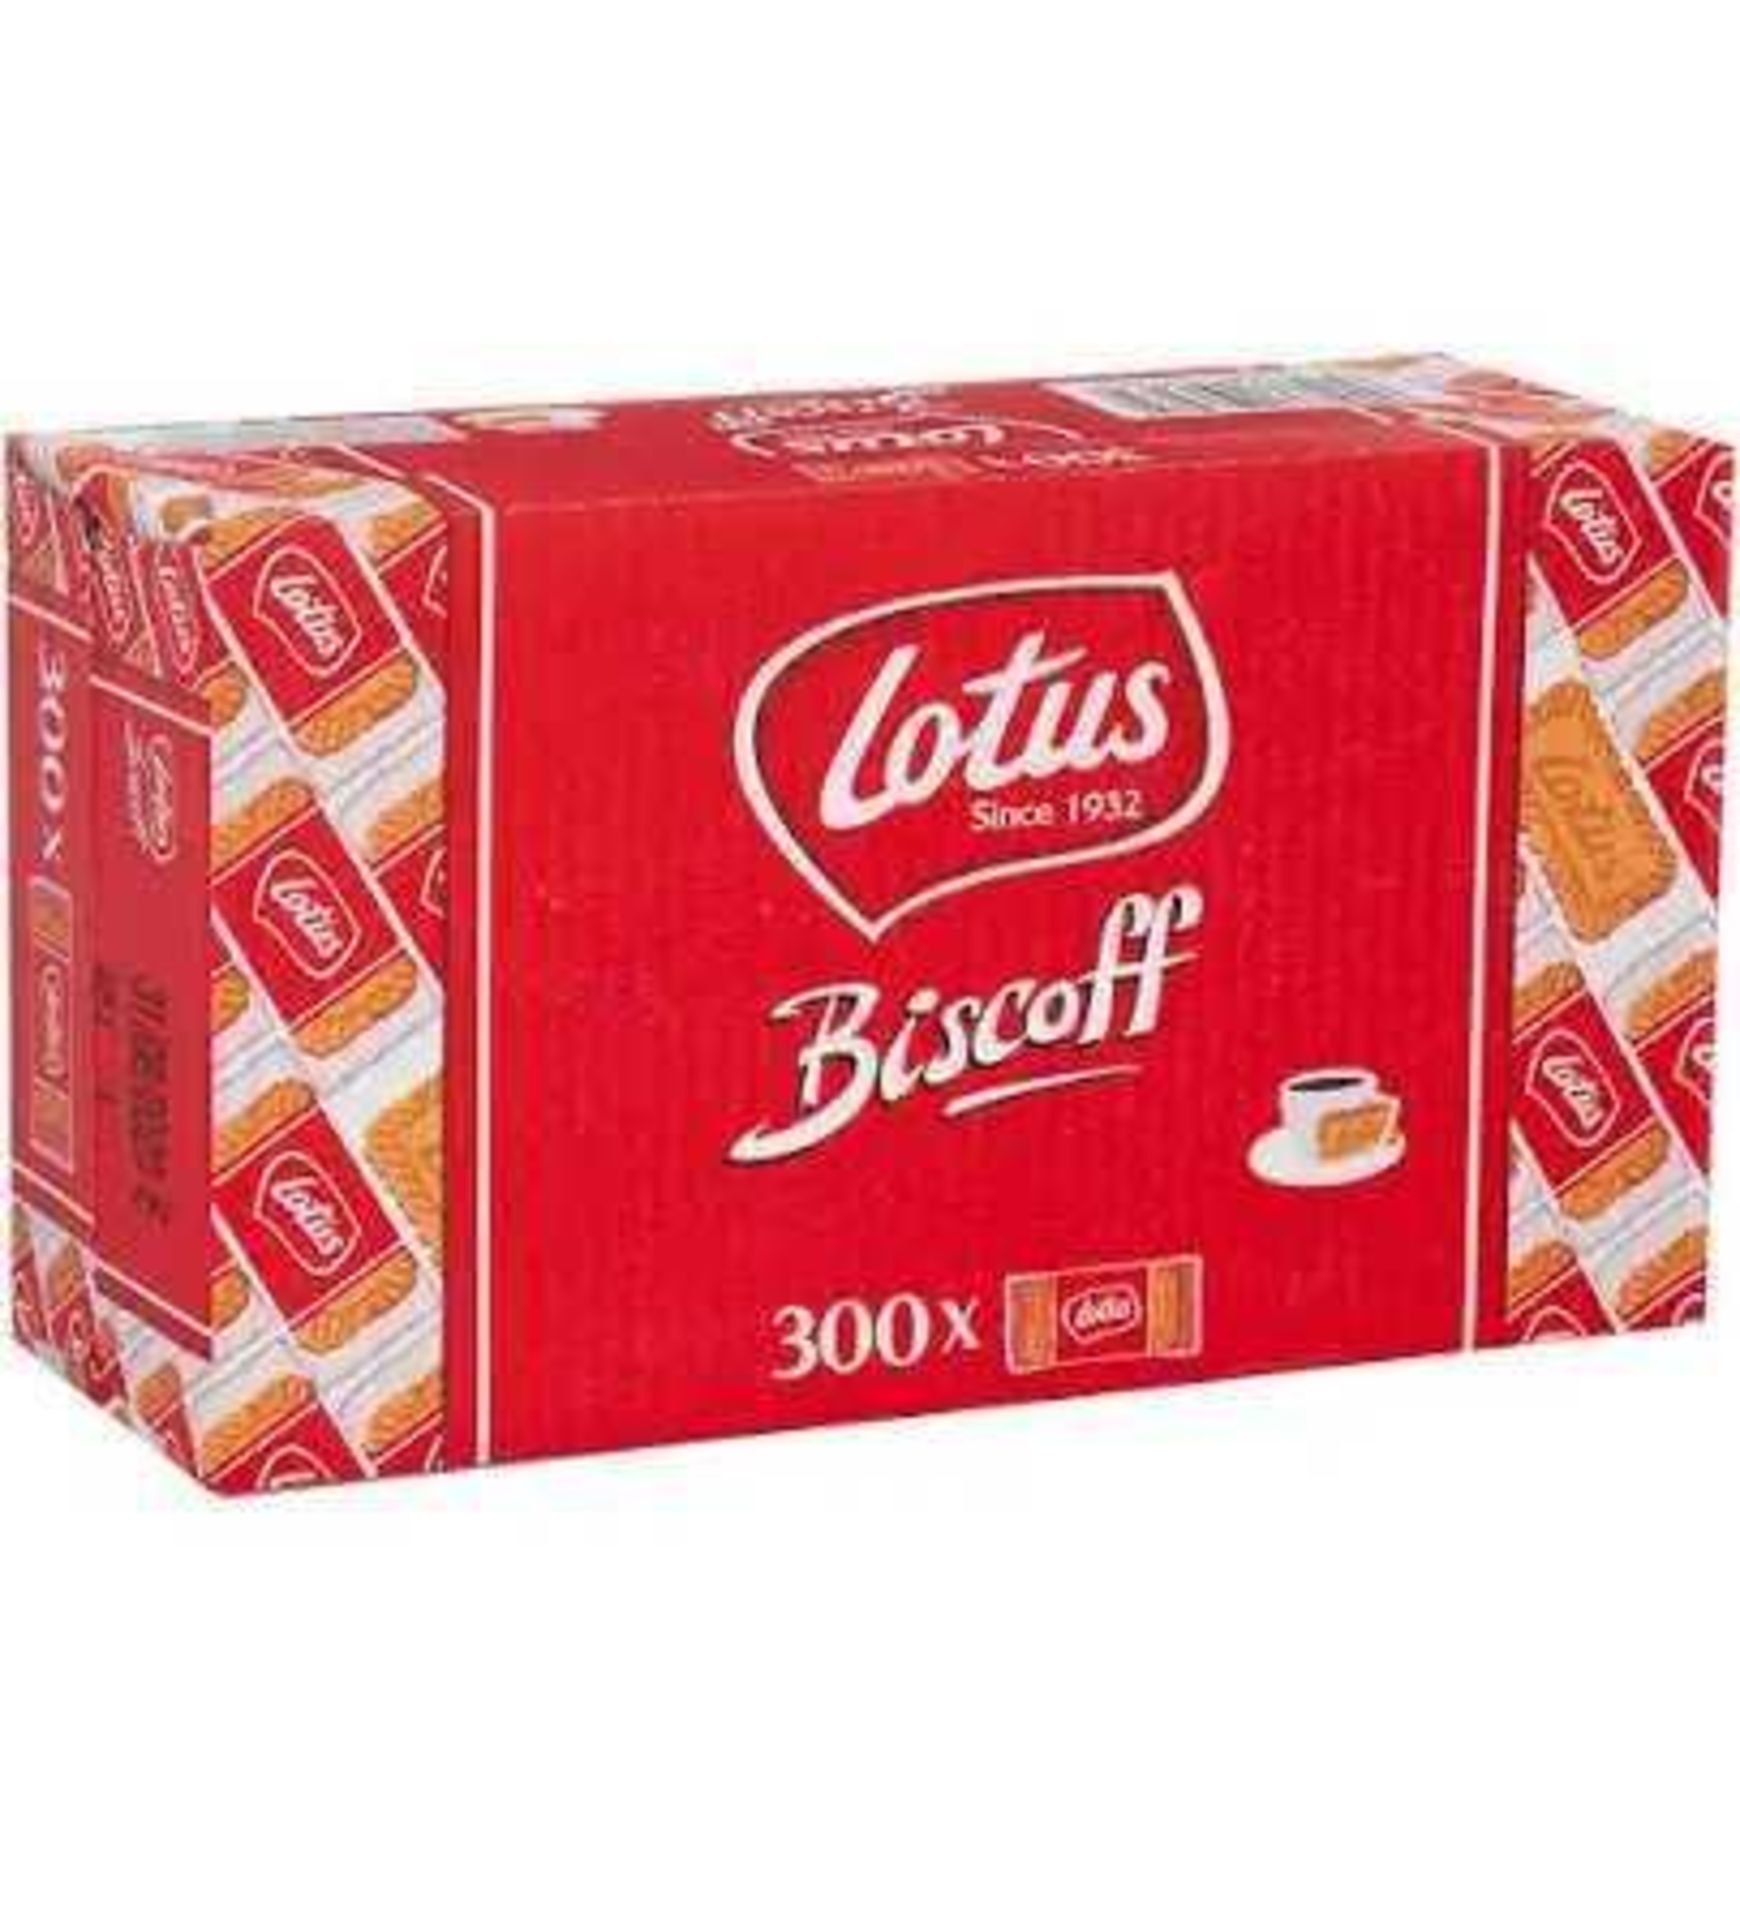 RRP £210 Brand New X15 Boxes Of Lotus Biscoff Caramelised Biscuit X300 Per Box 1.875Kg, Best Before